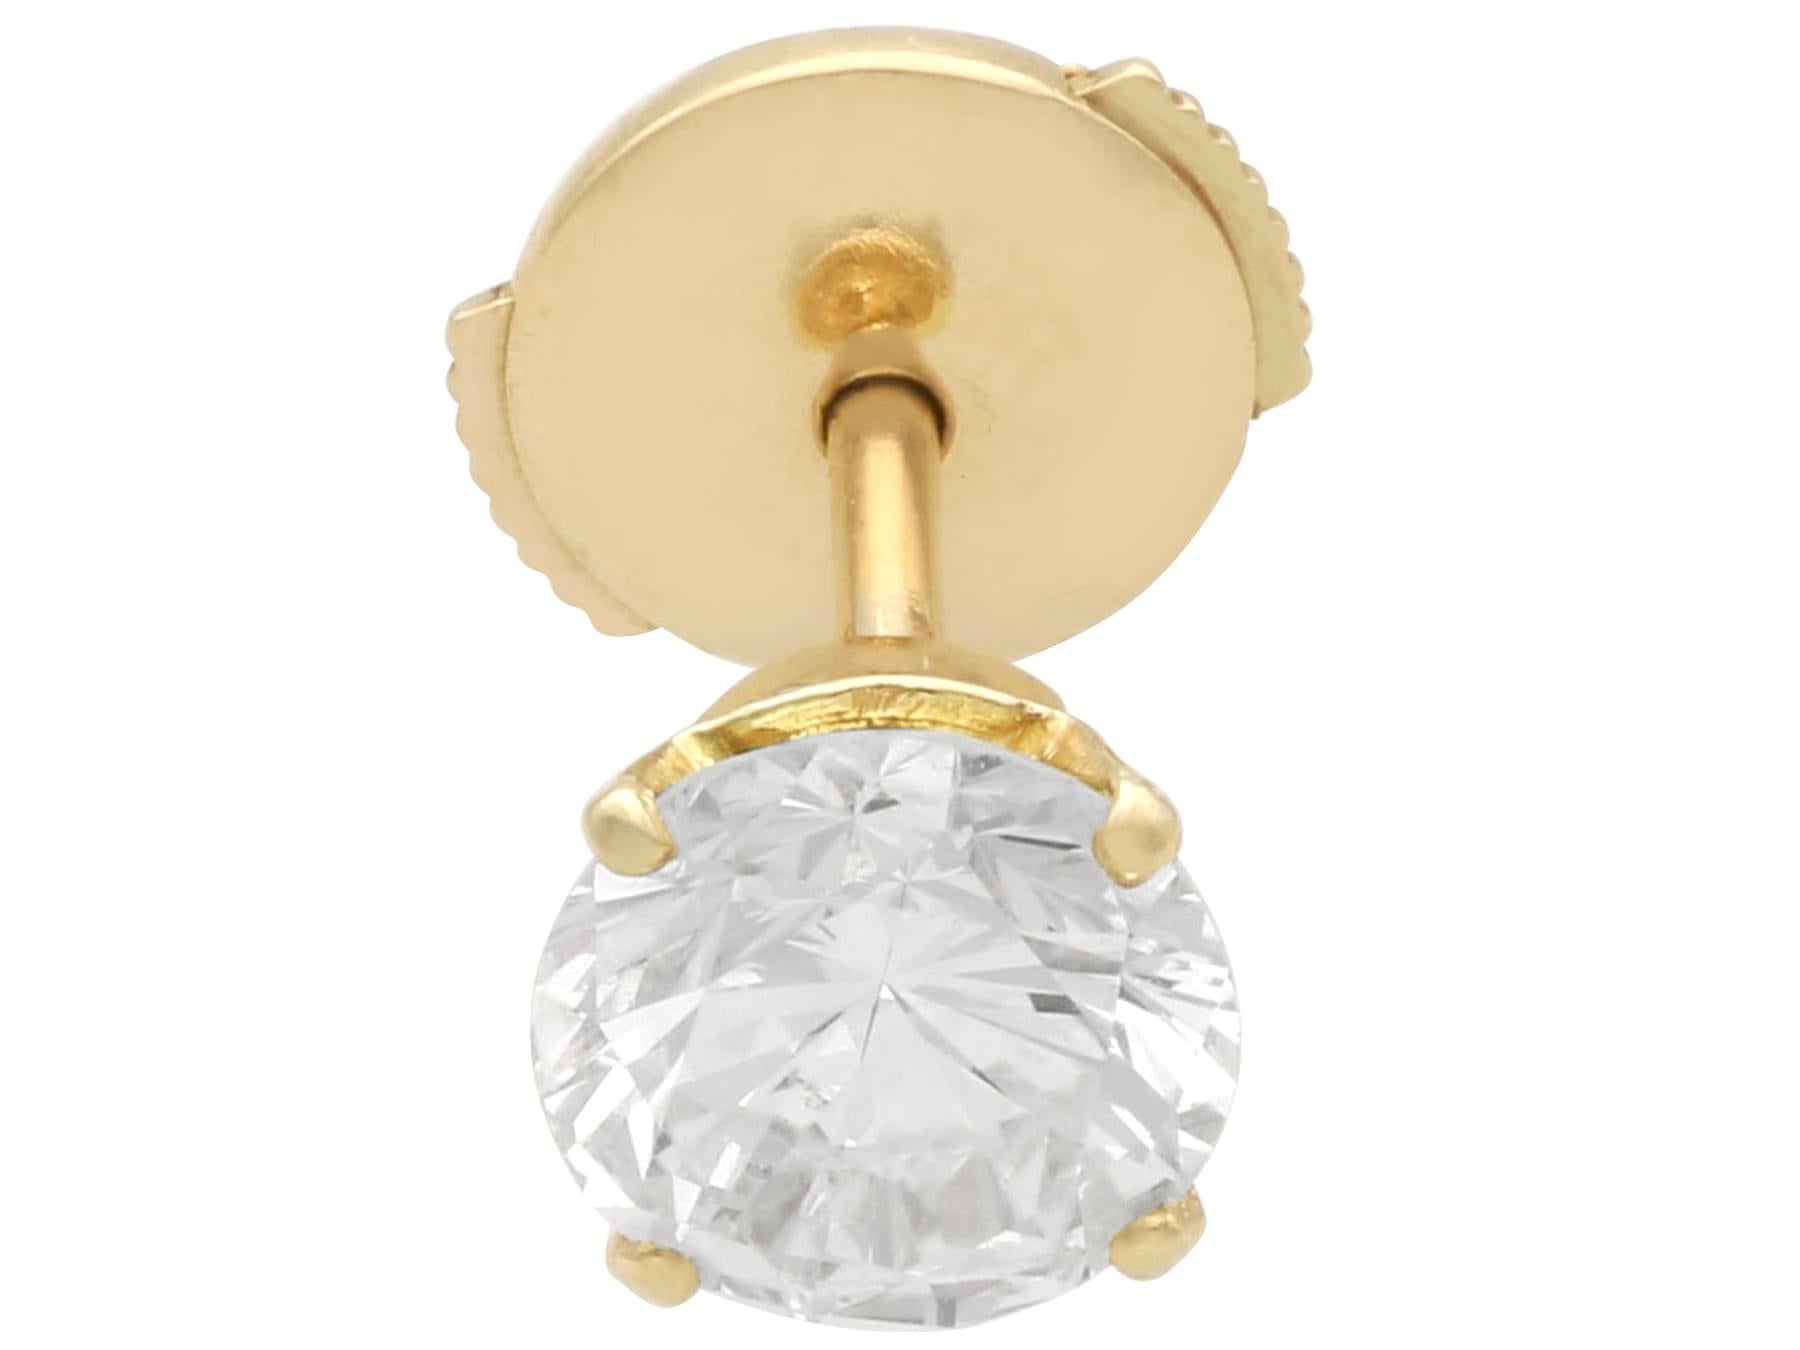 A stunning, fine and impressive pair of vintage 2.01 carat diamond and 18 karat yellow gold stud earrings; part of our vintage jewelry and estate jewelry collections.

These impressive vintage stud earrings have been crafted in 18k yellow gold.

The